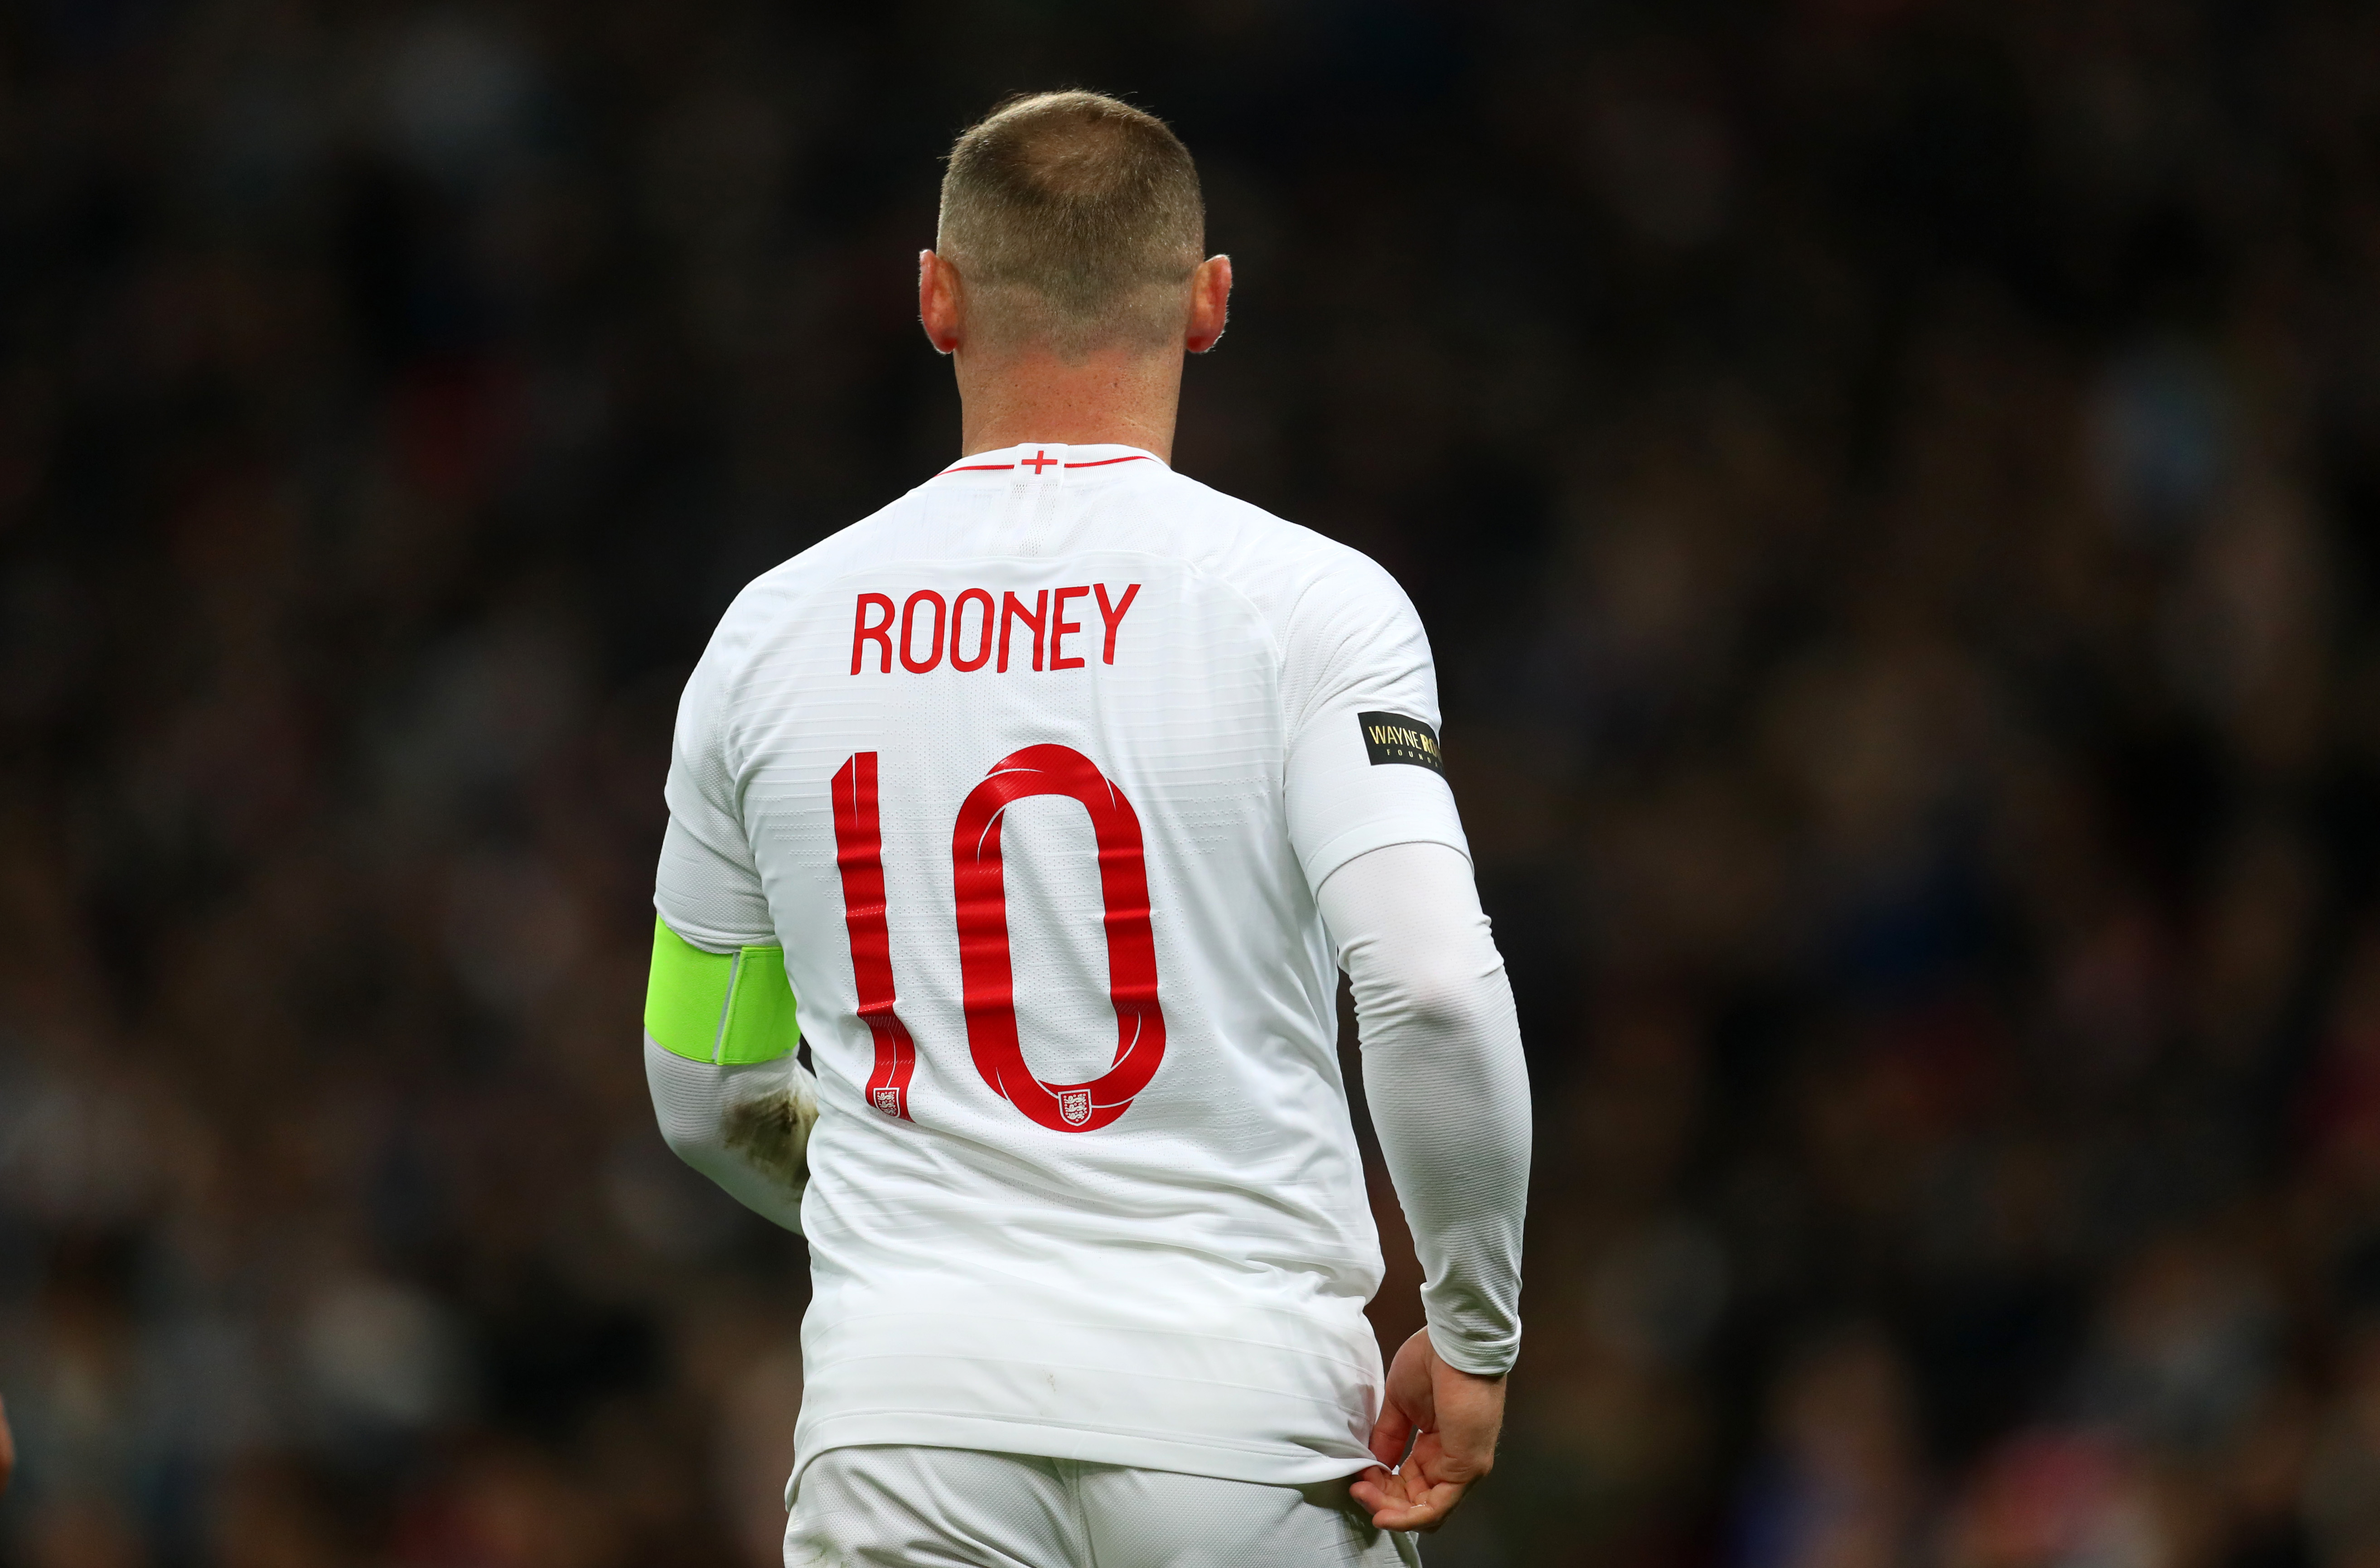 LONDON, ENGLAND - NOVEMBER 15: Wayne Rooney of England during the International Friendly match between England and United States at Wembley Stadium on November 15, 2018 in London, United Kingdom. (Photo by Catherine Ivill/Getty Images)